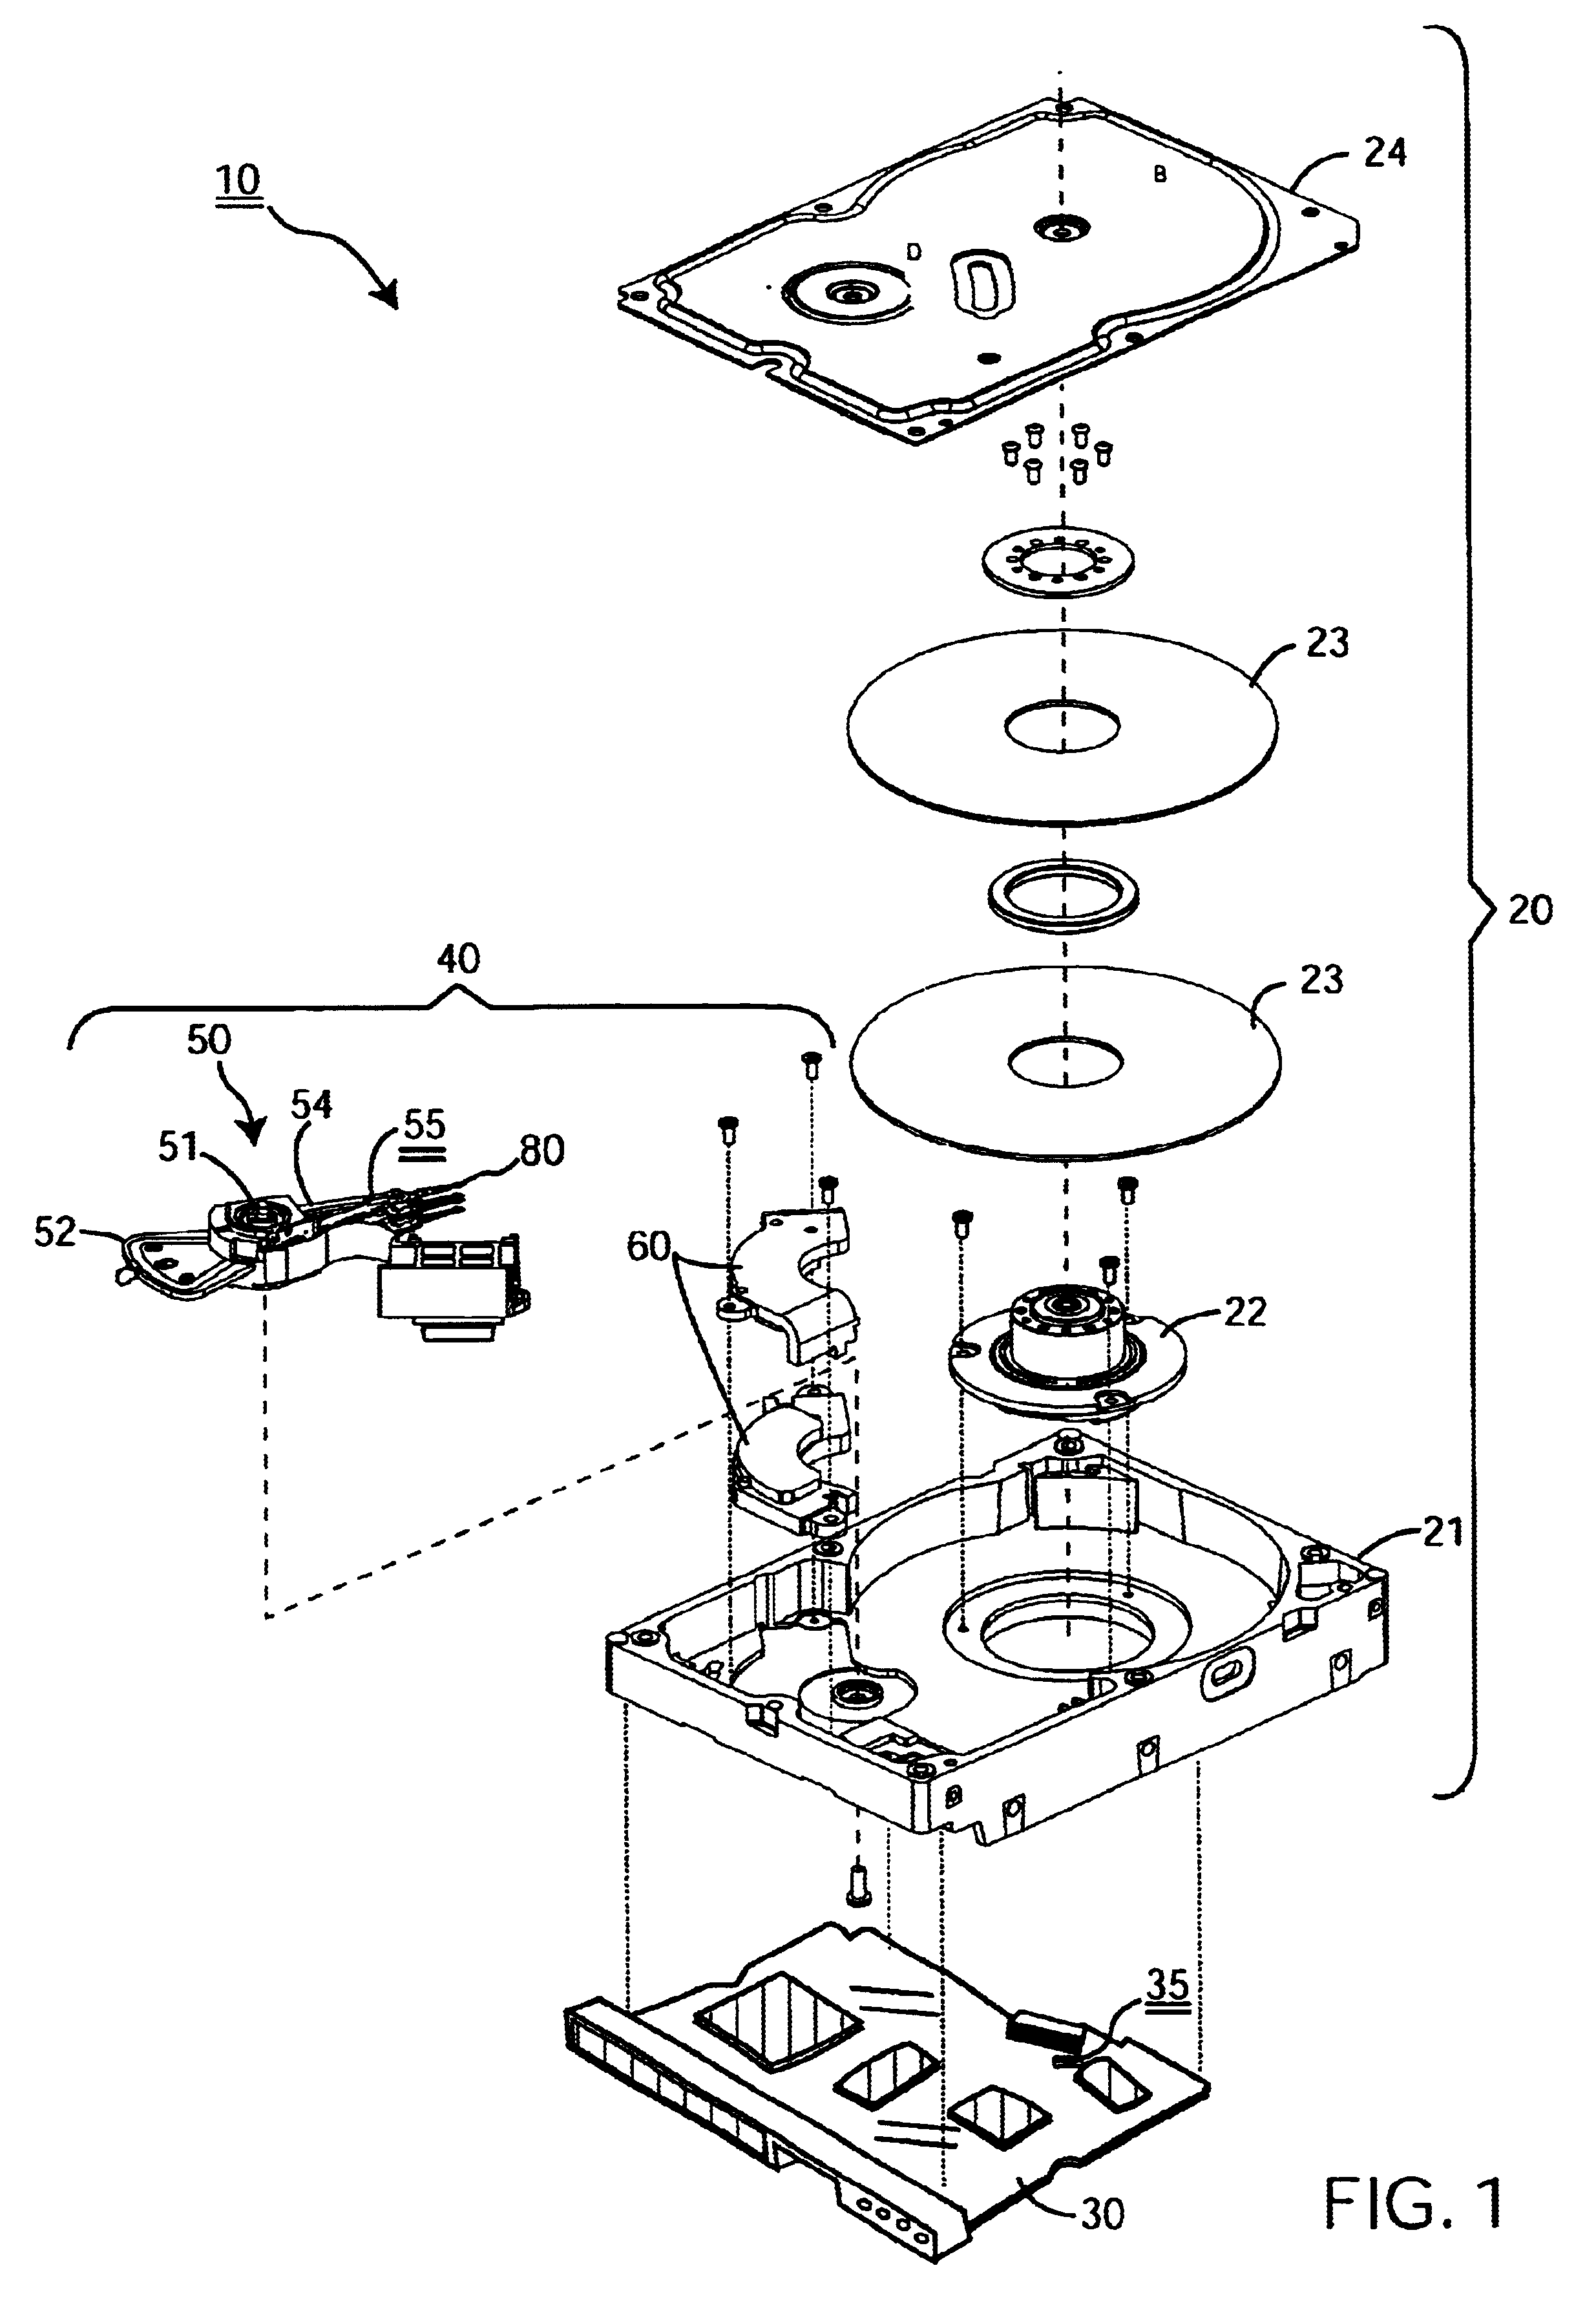 Disk drive having separate motion sensors for base and actuator